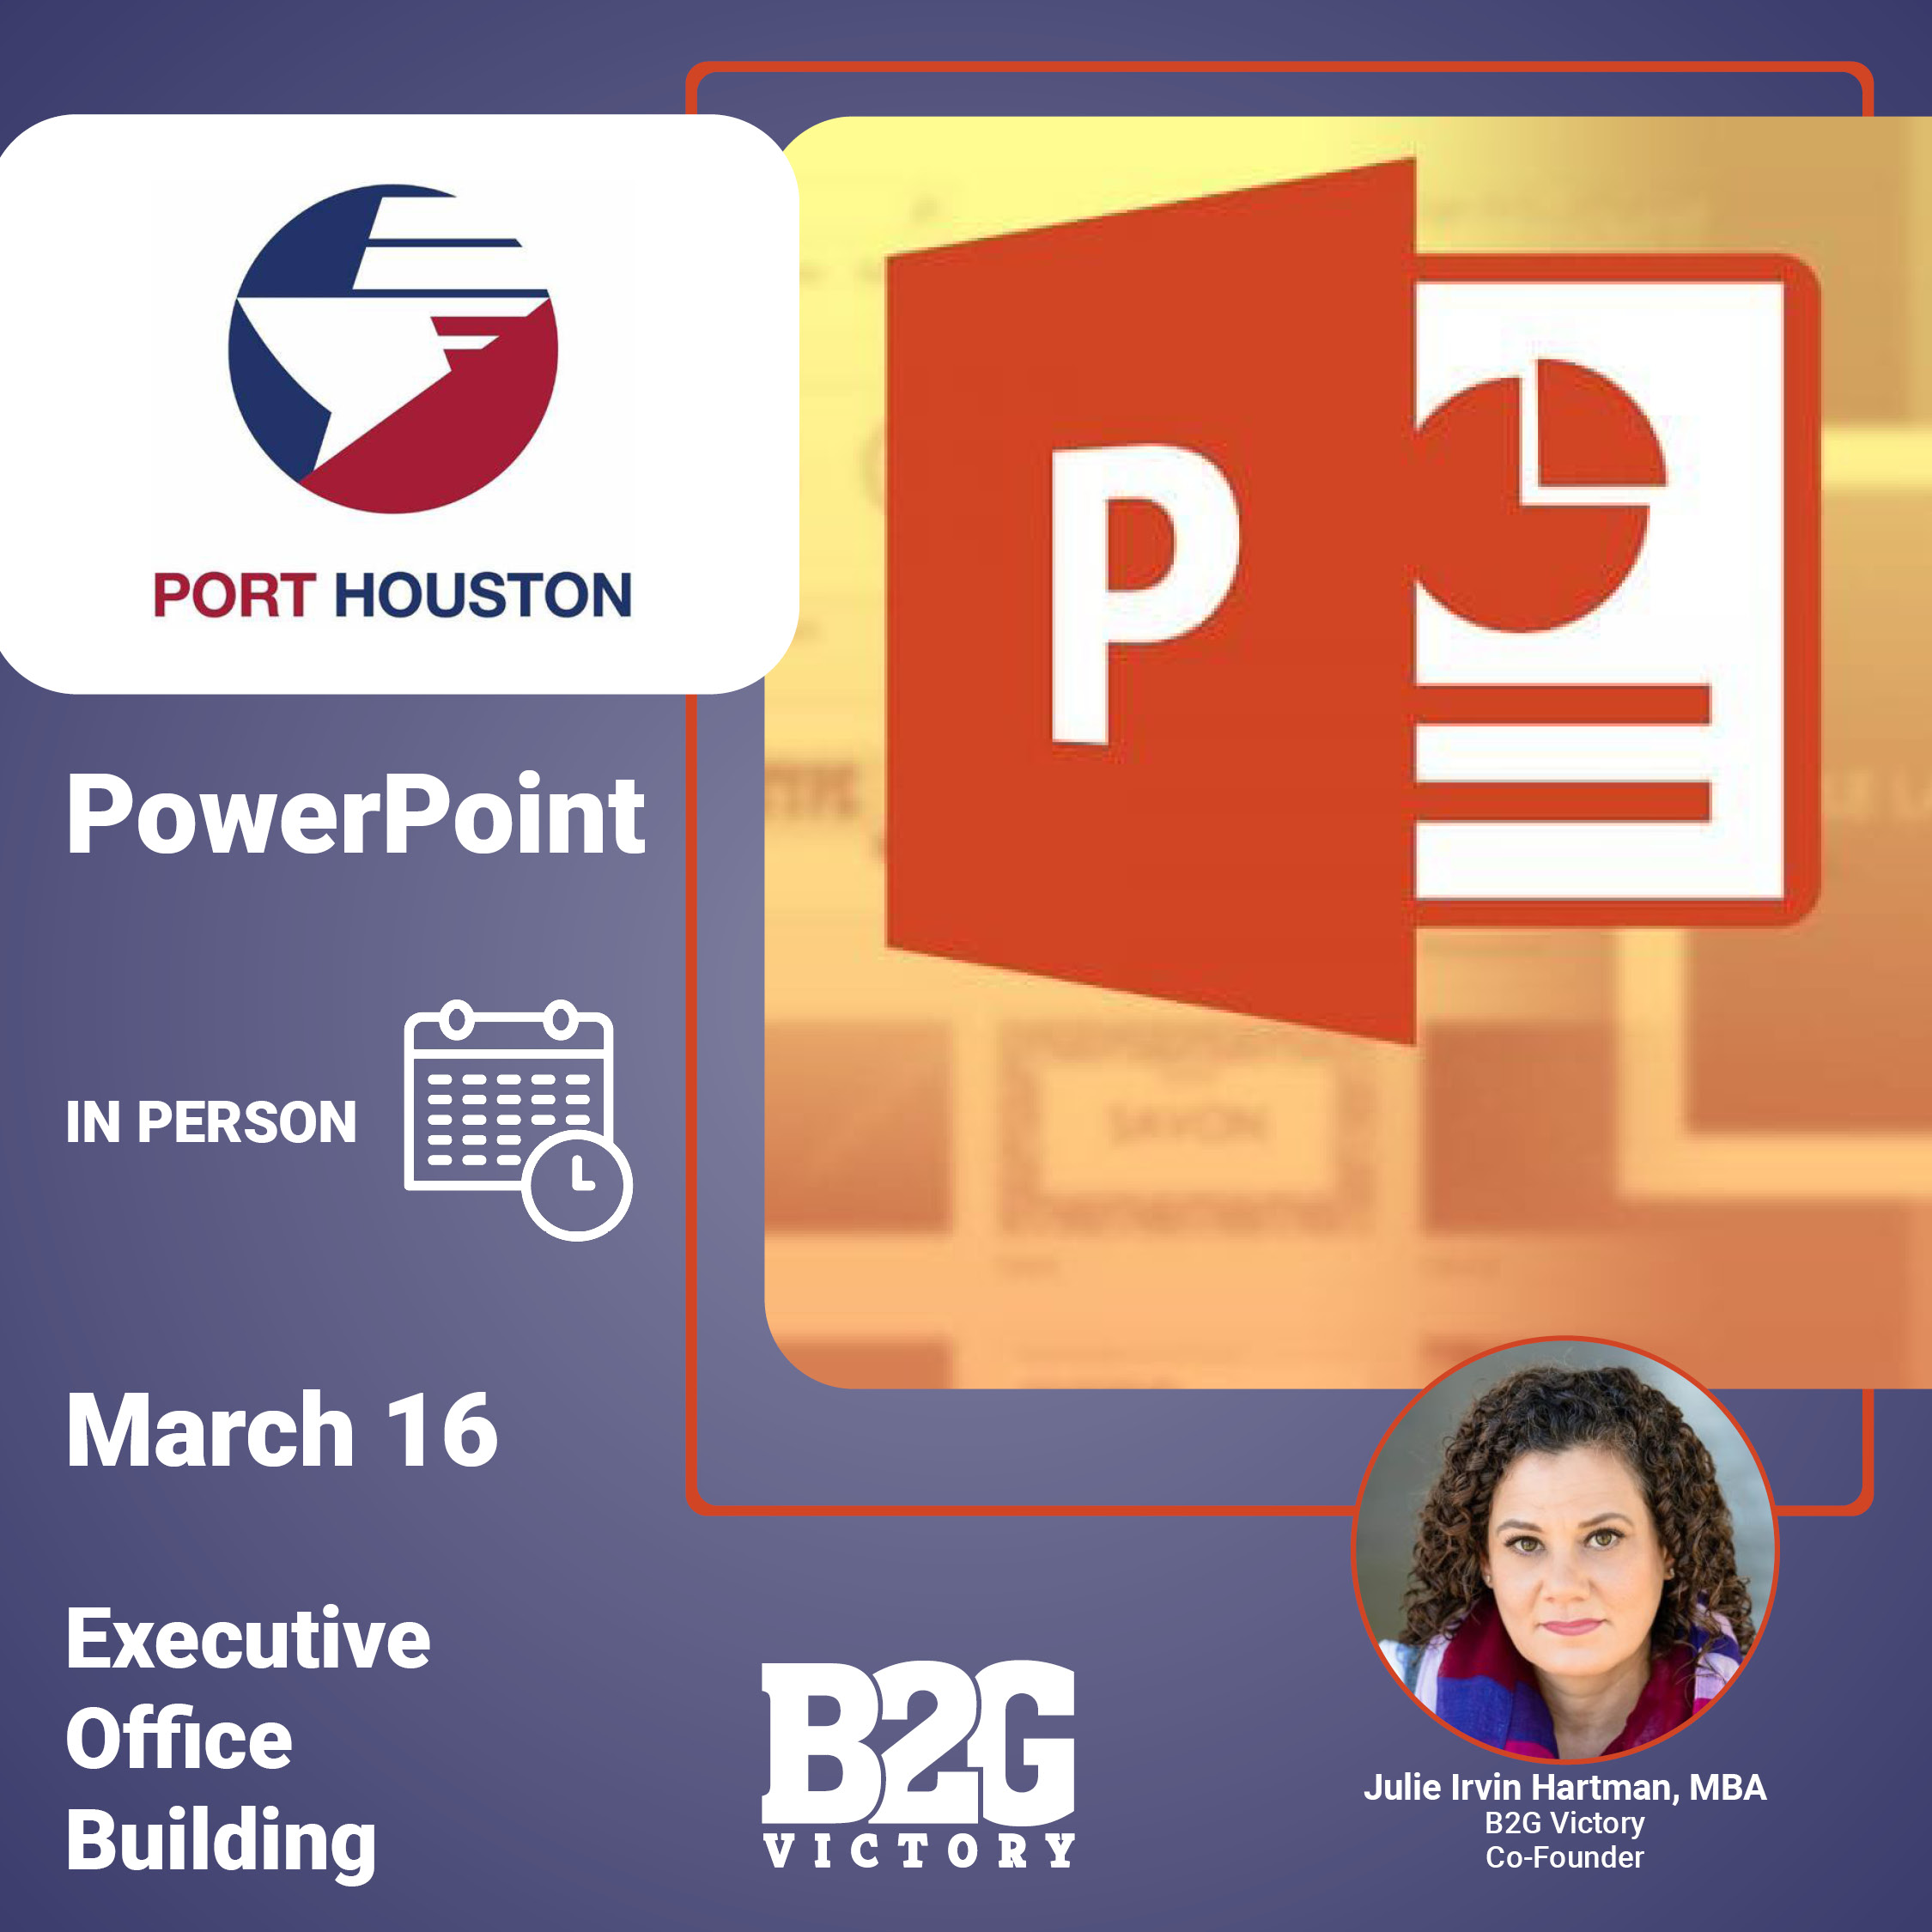 Port Houston PowerPoint Training March 16 Executive Office Building